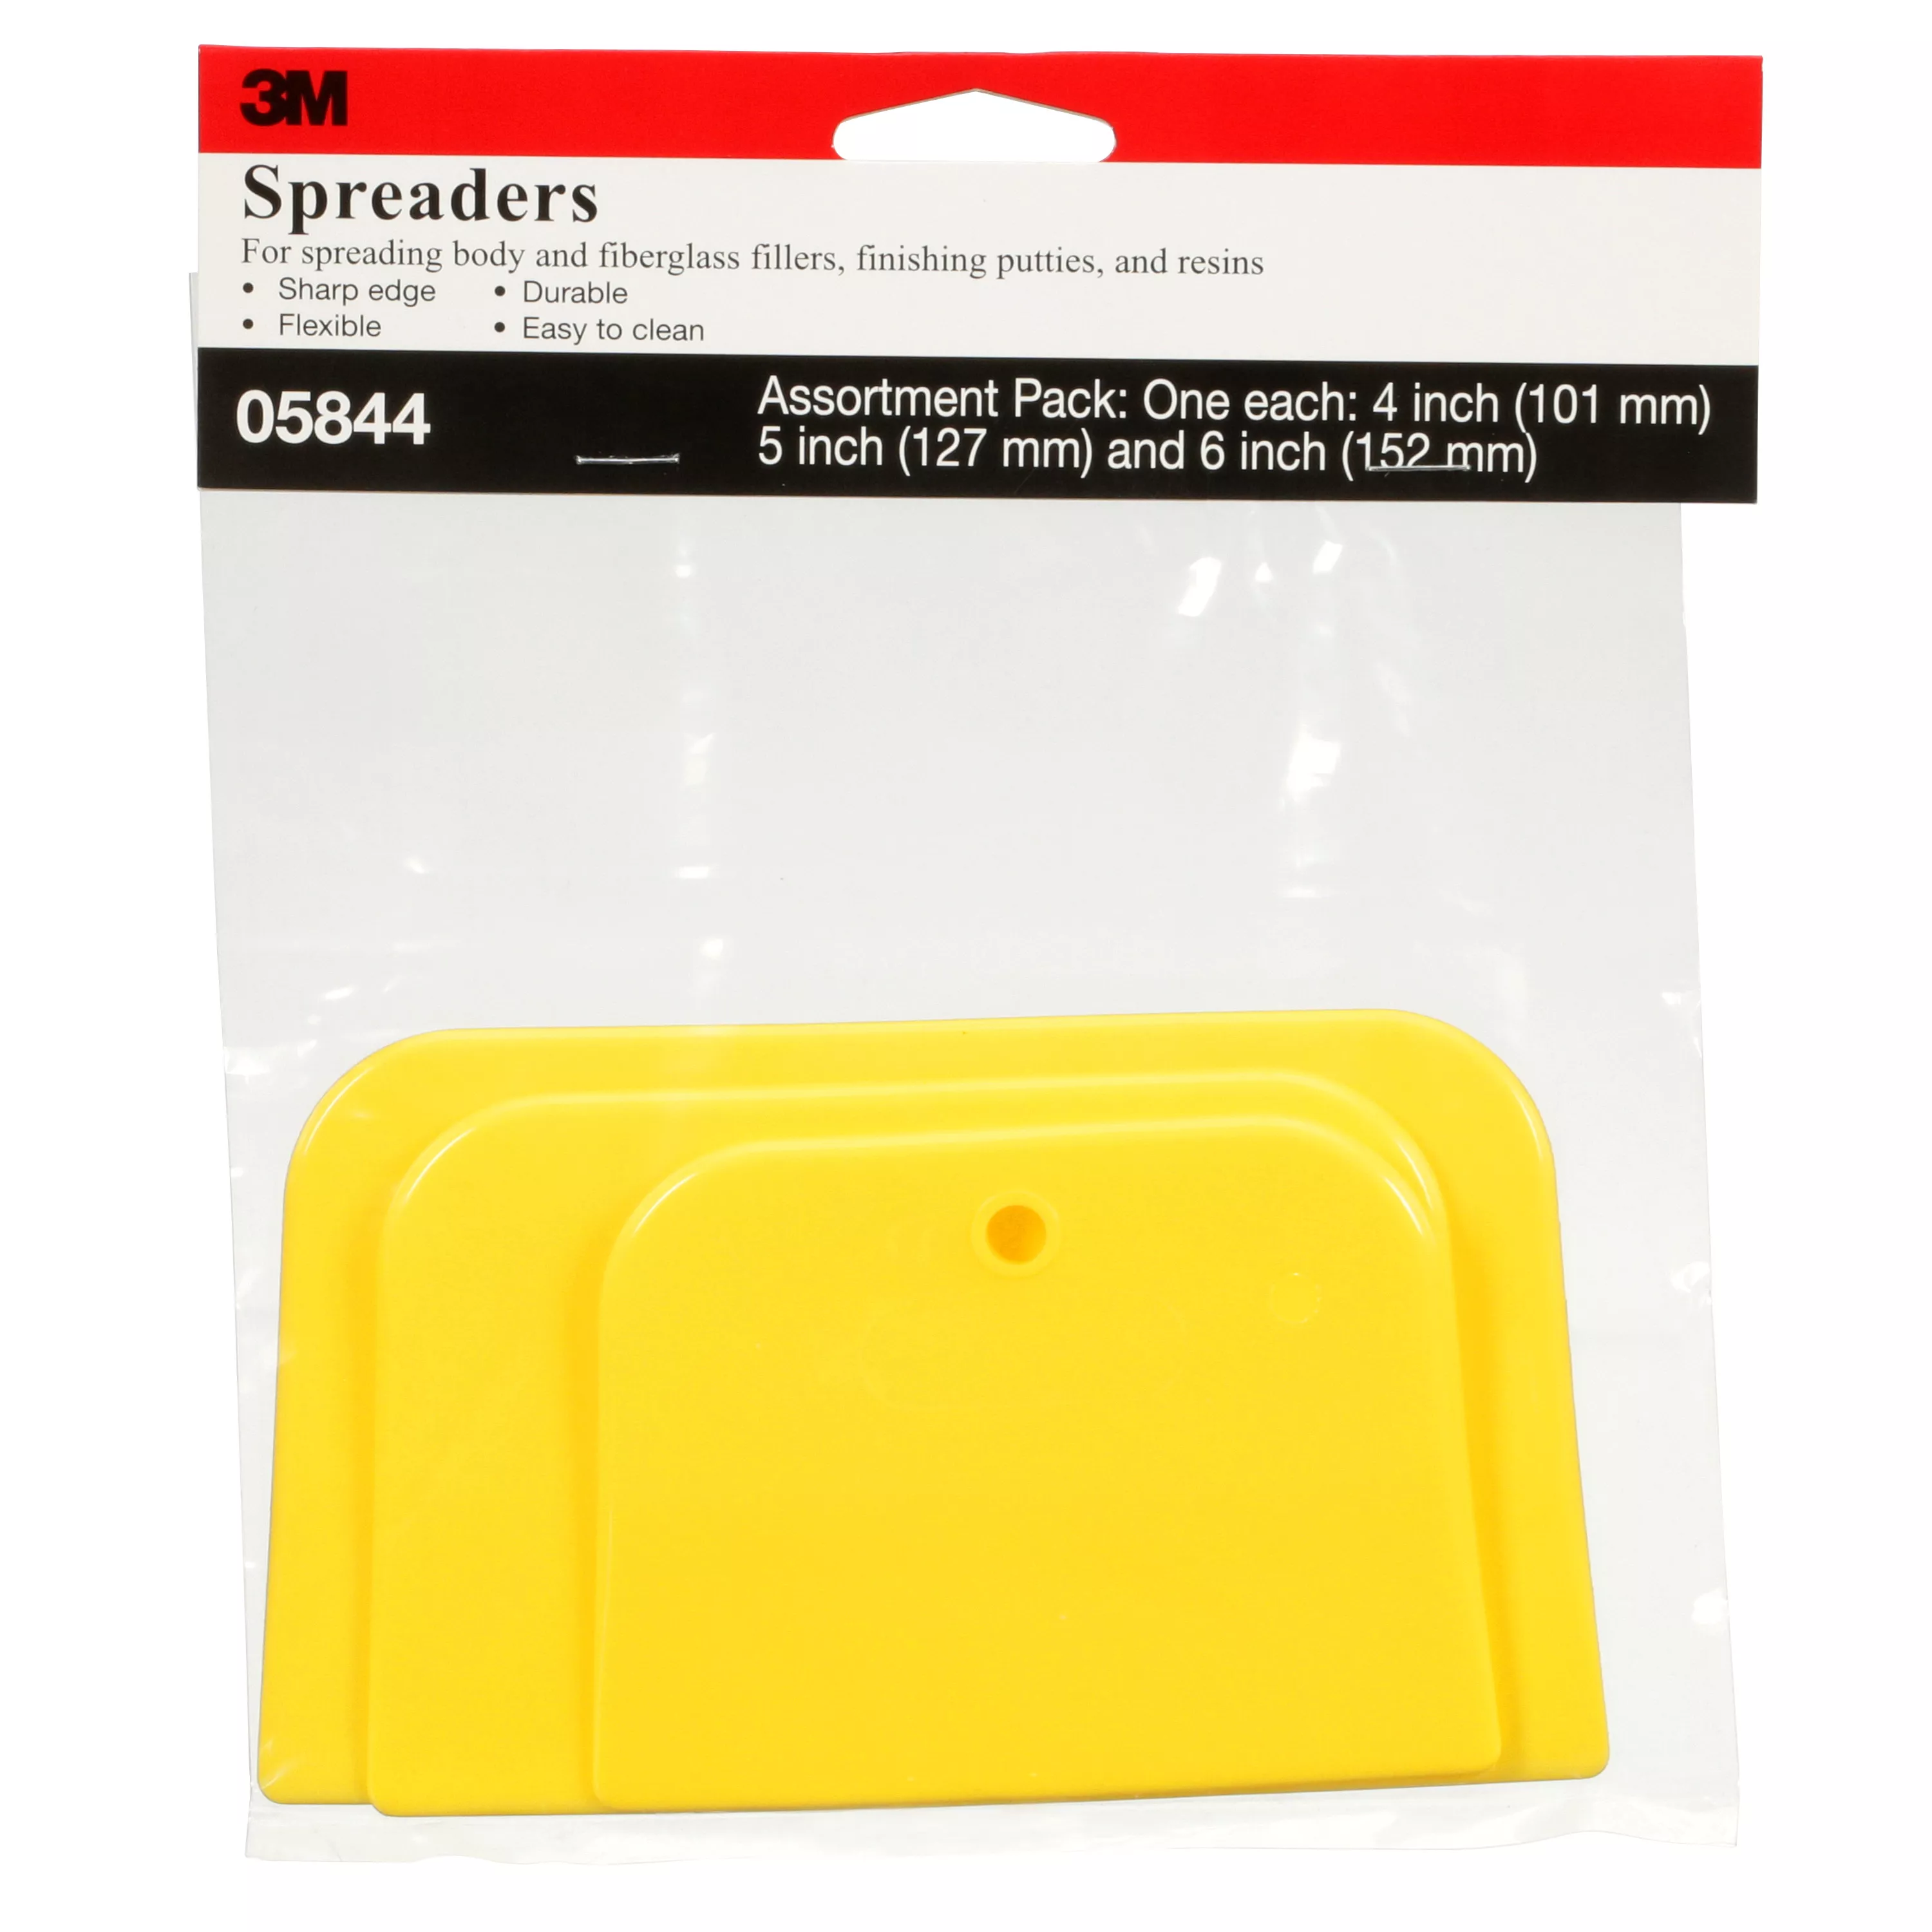 Product Number 05844 | 3M™ Spreader Assortment